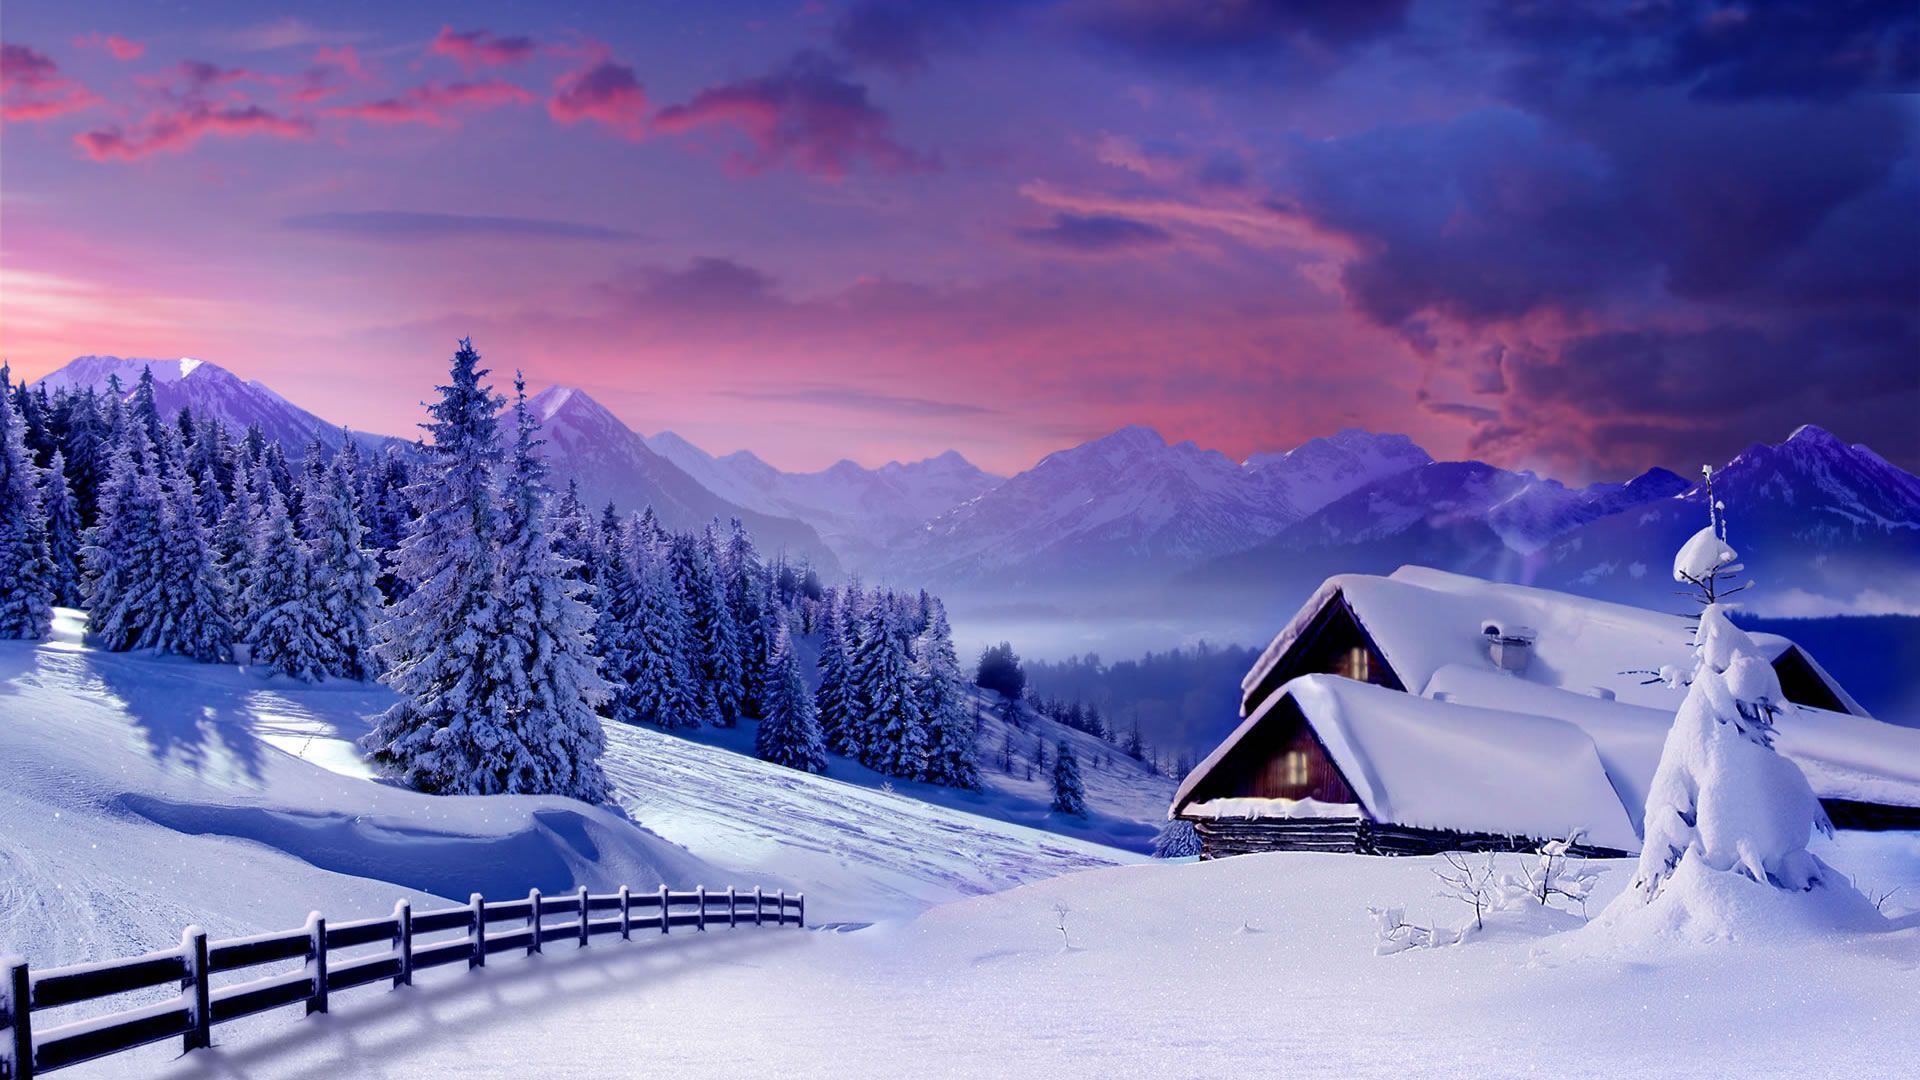 Winter Wallpaper HD 1920x1080 - HD Wallpapers Backgrounds of Your